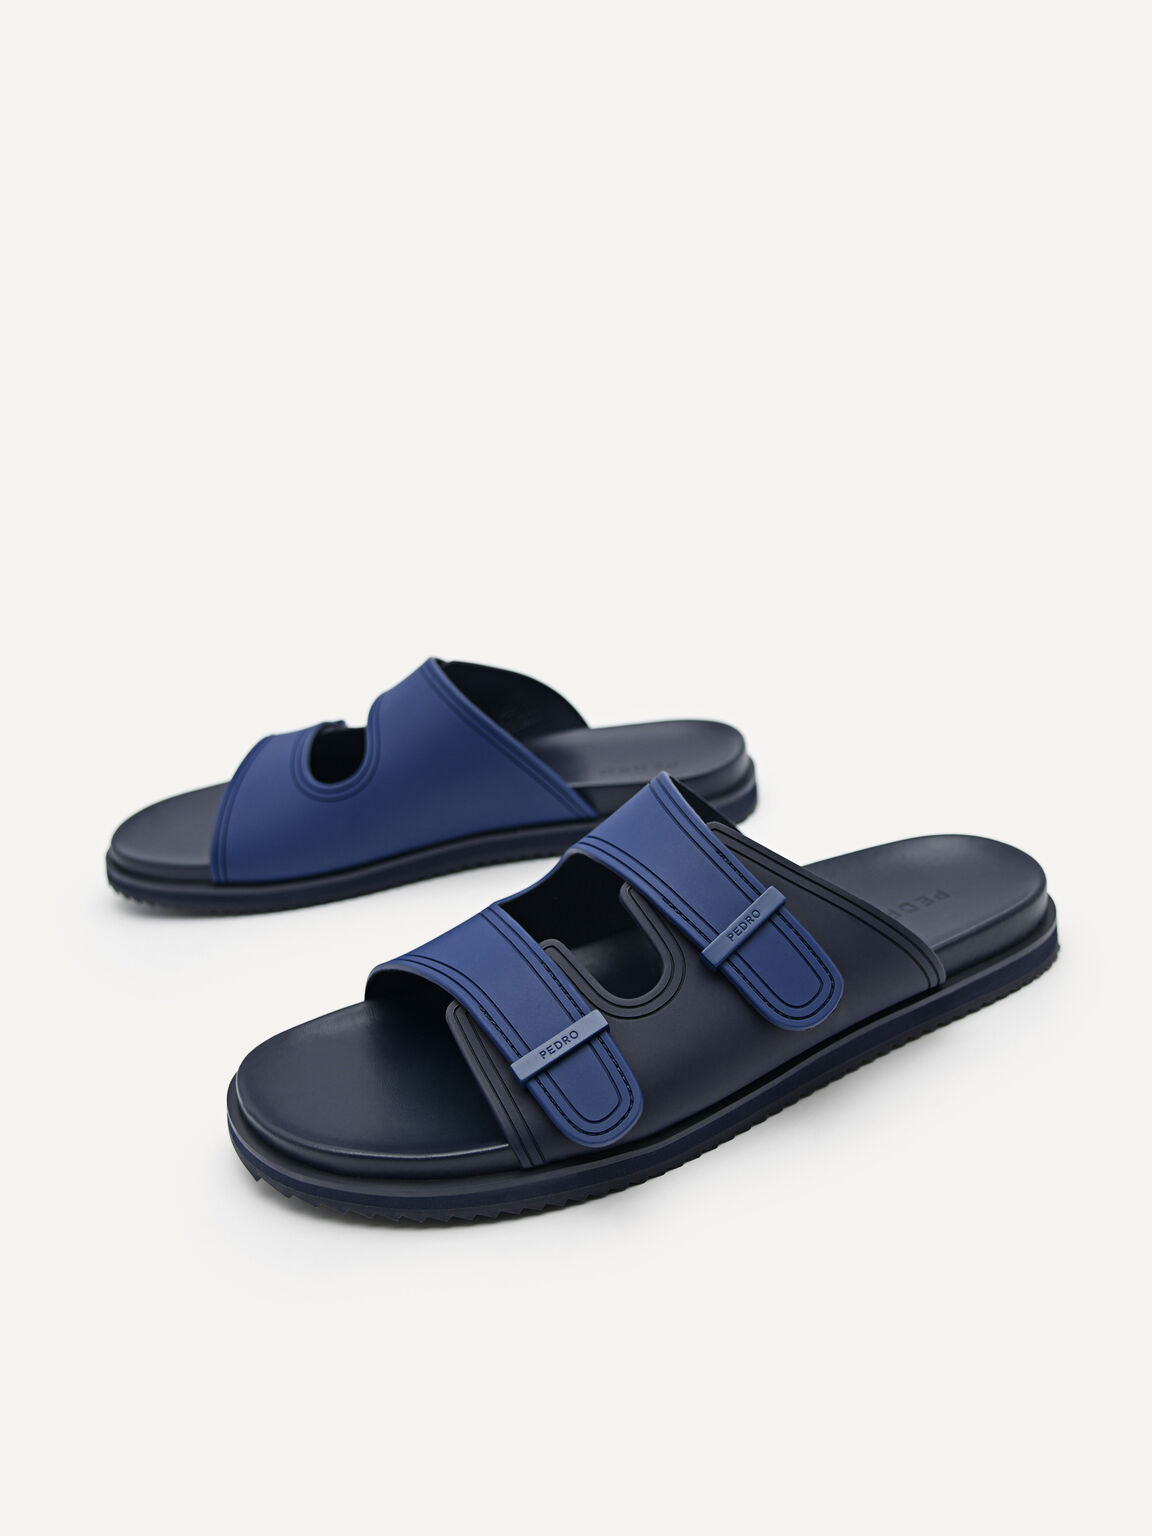 Rubber Double-strap Walking Sandals, Navy